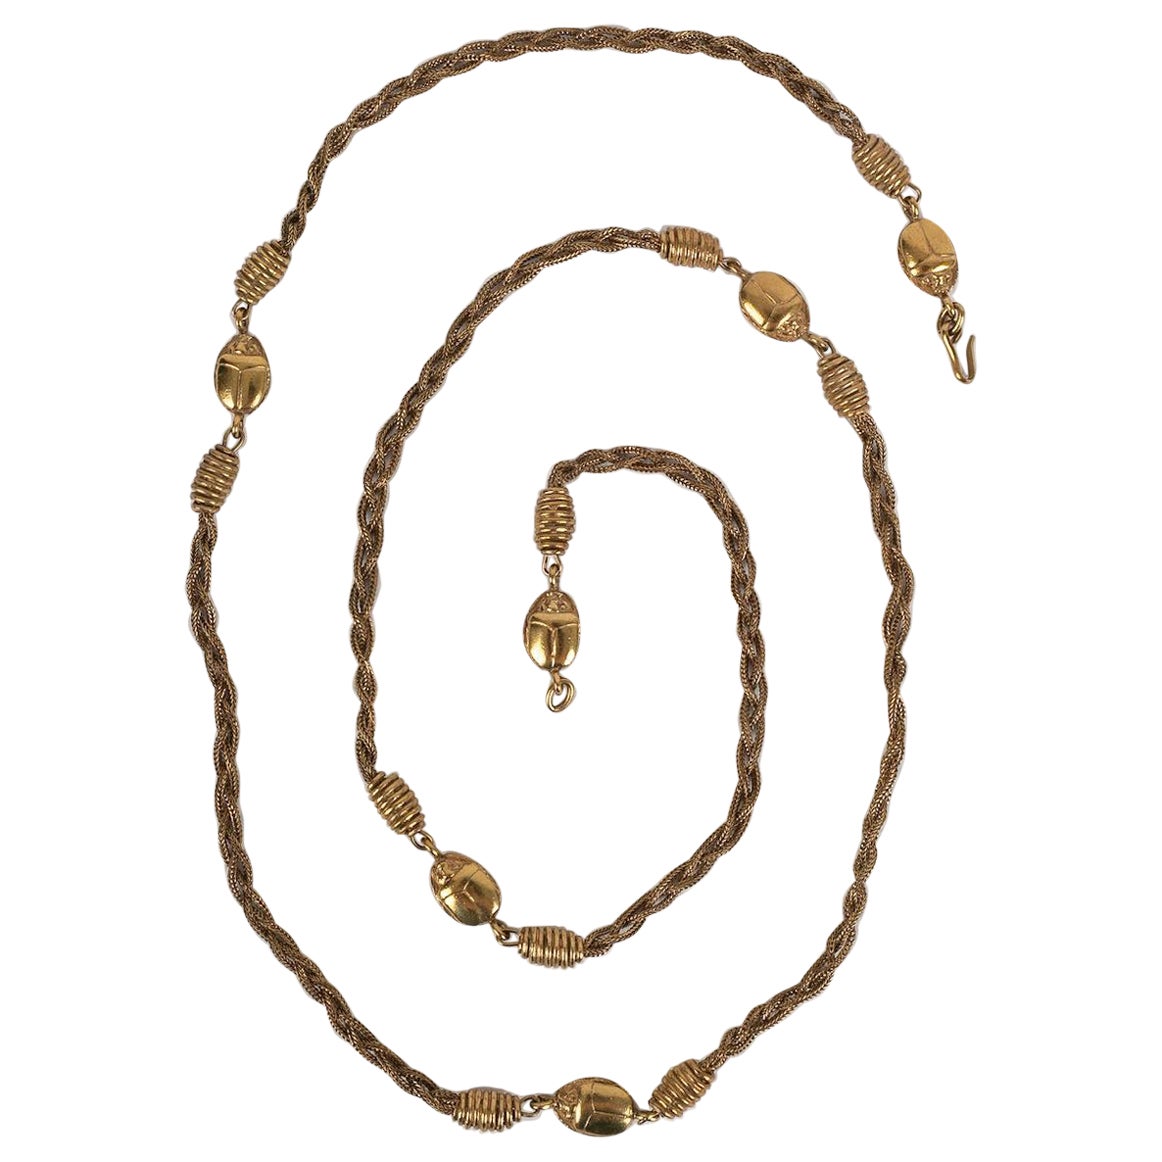 Chanel "Scarabées" Necklace in Gold metal